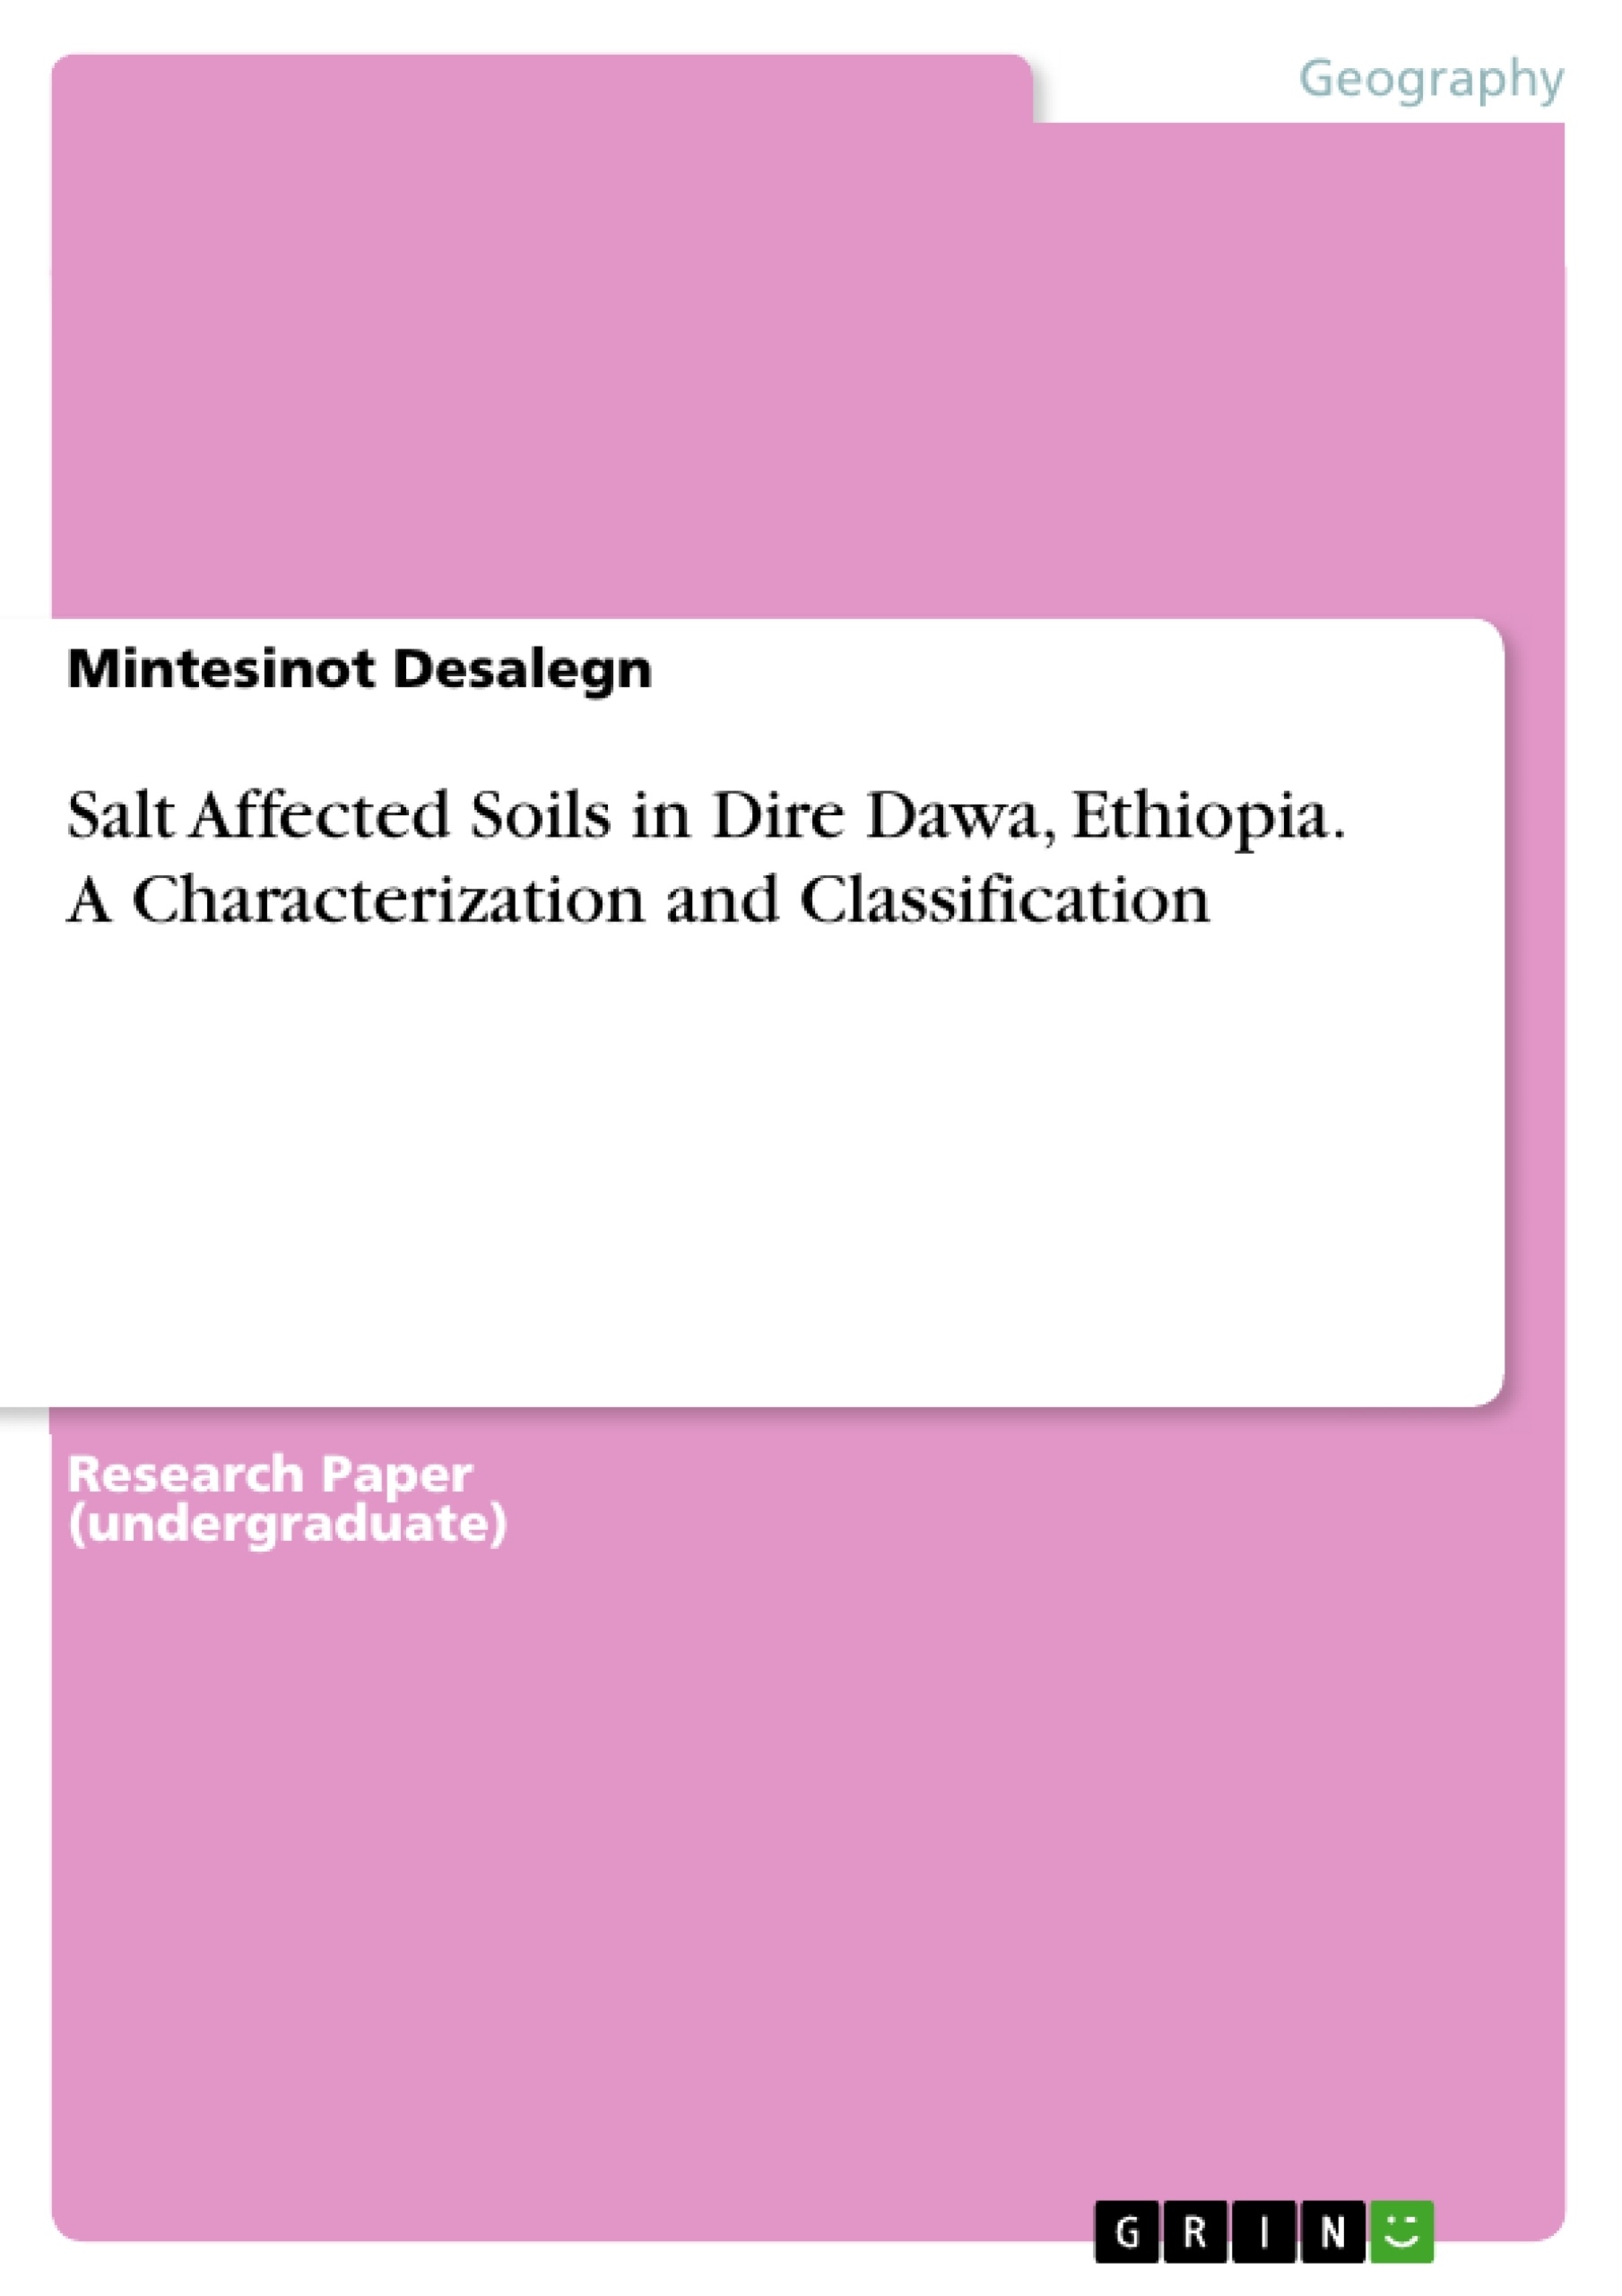 Title: Salt Affected Soils in Dire Dawa, Ethiopia. A Characterization and Classification